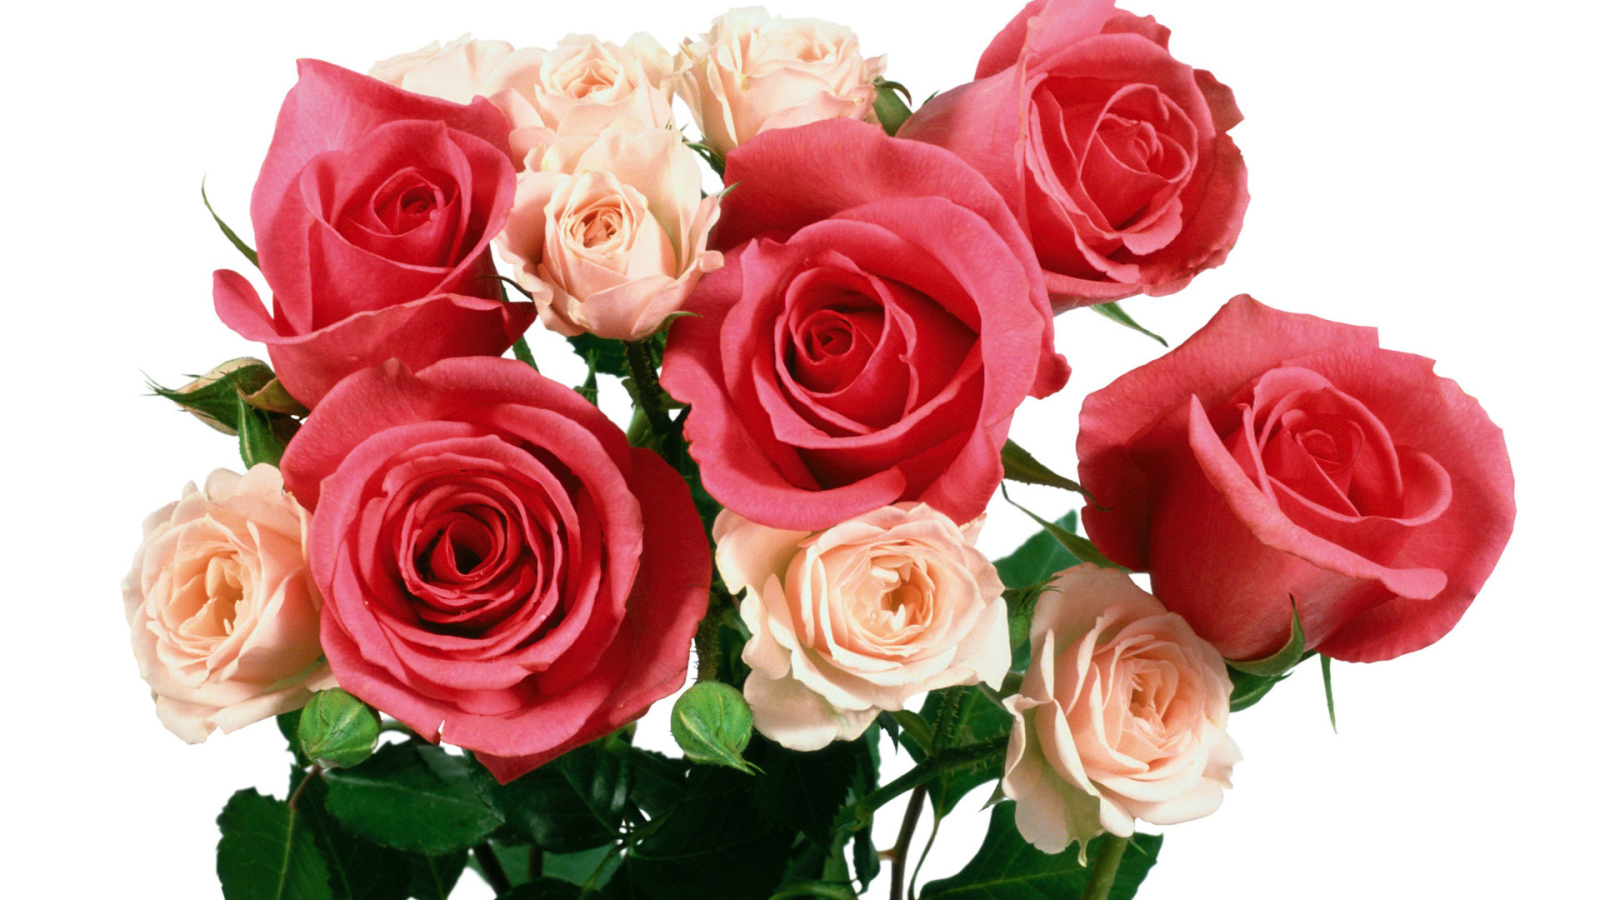 A bouquet of red and beige roses on March 8